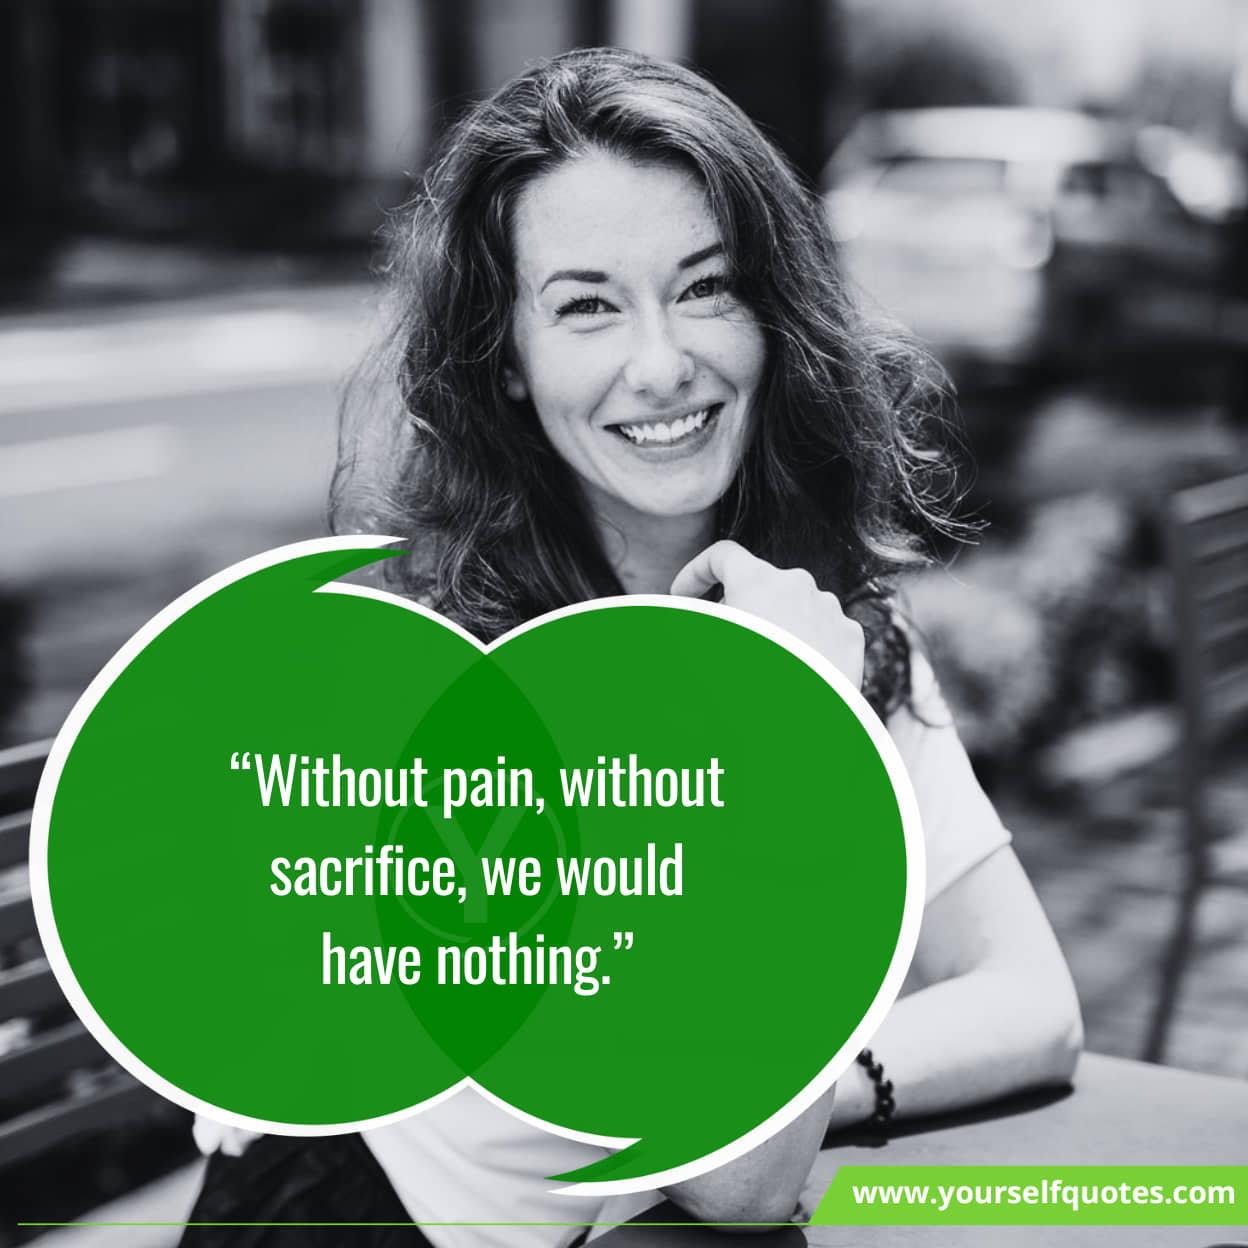 Inspirational Quotes On Pain To Stay Strong